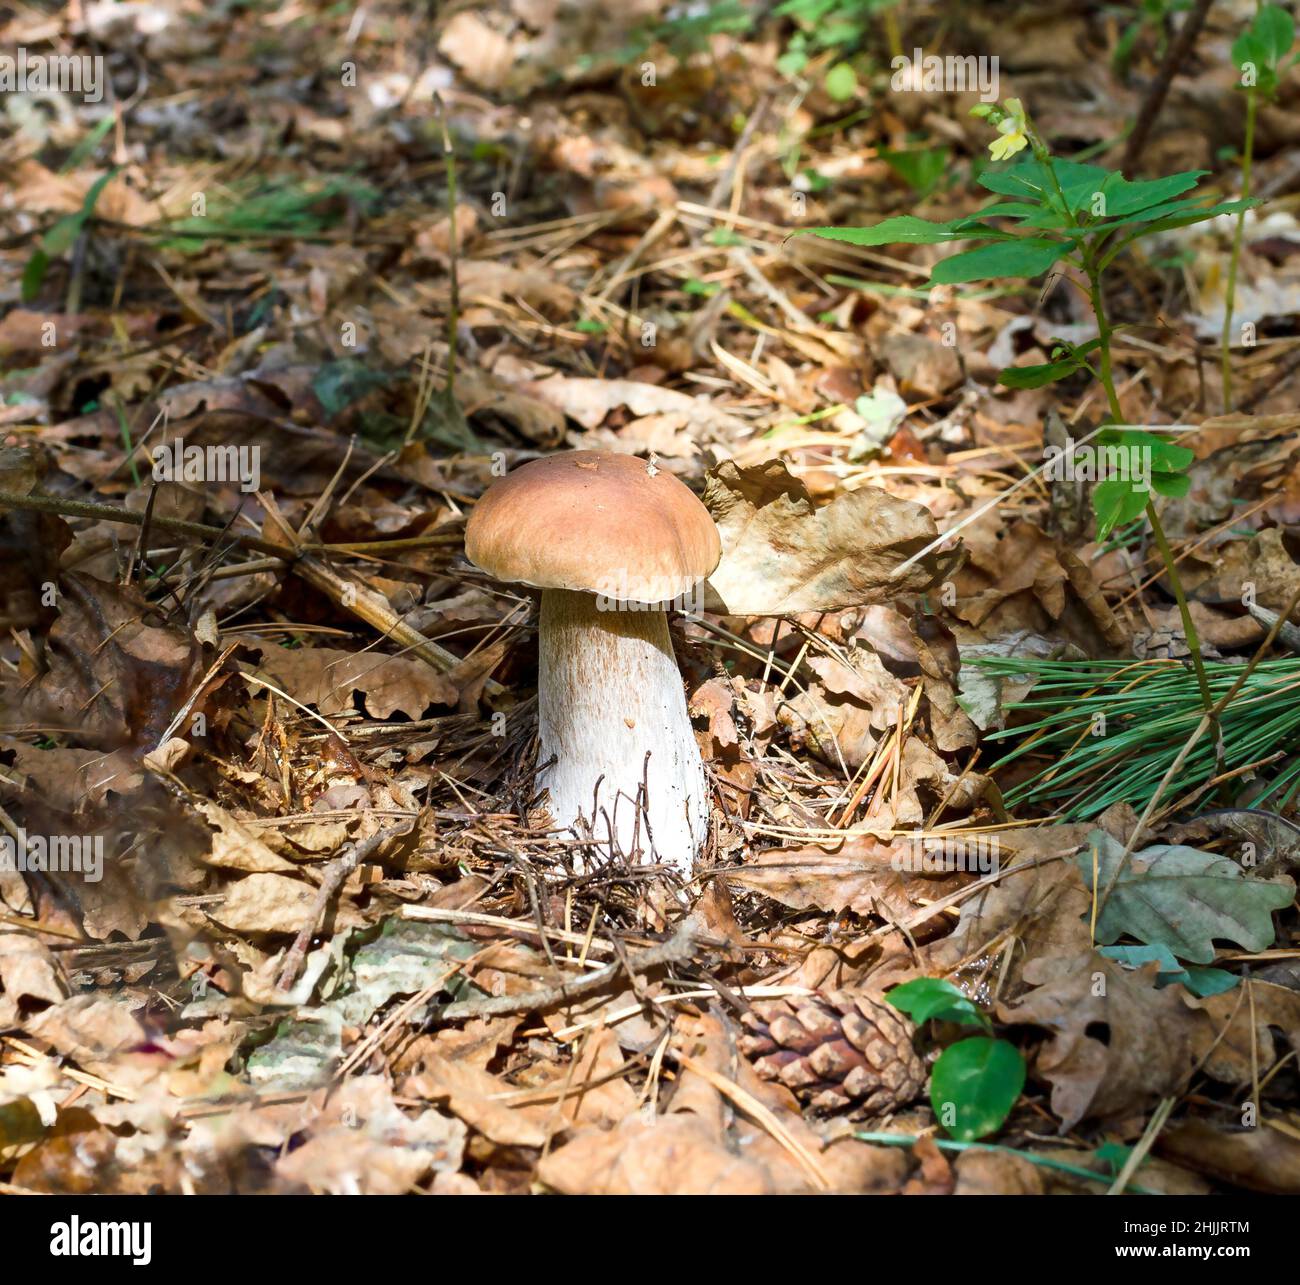 white edible mushroom grows in the forest on a warm day close-up Stock Photo